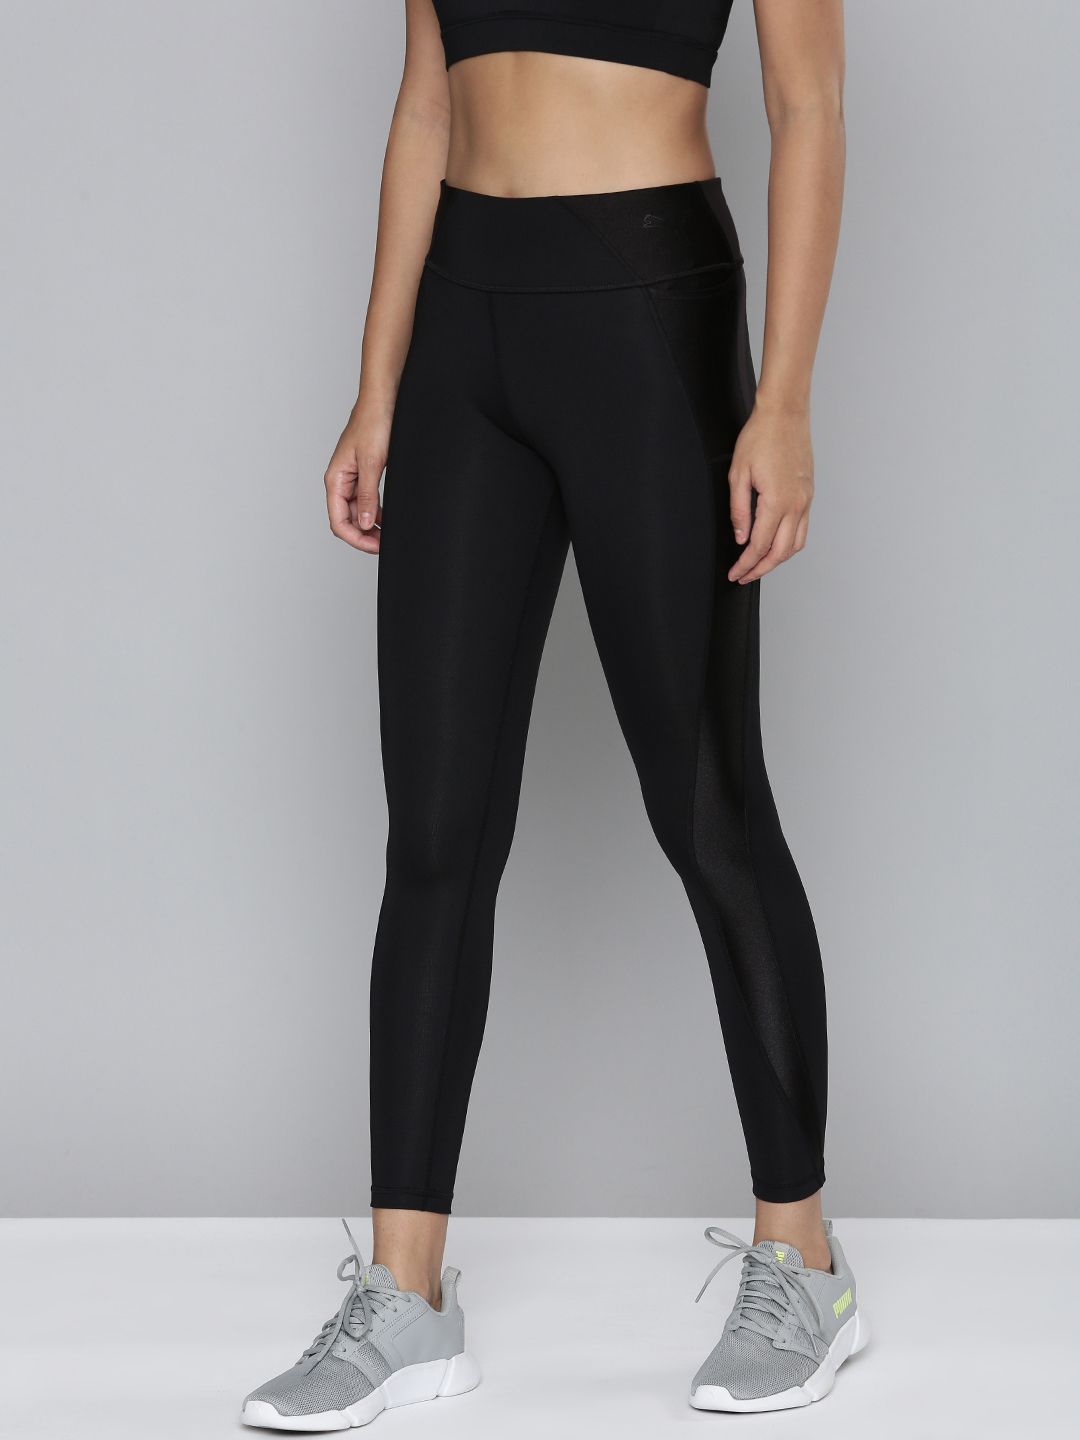 Puma Women Black Solid dryCELL Day in Motion Tights Price in India